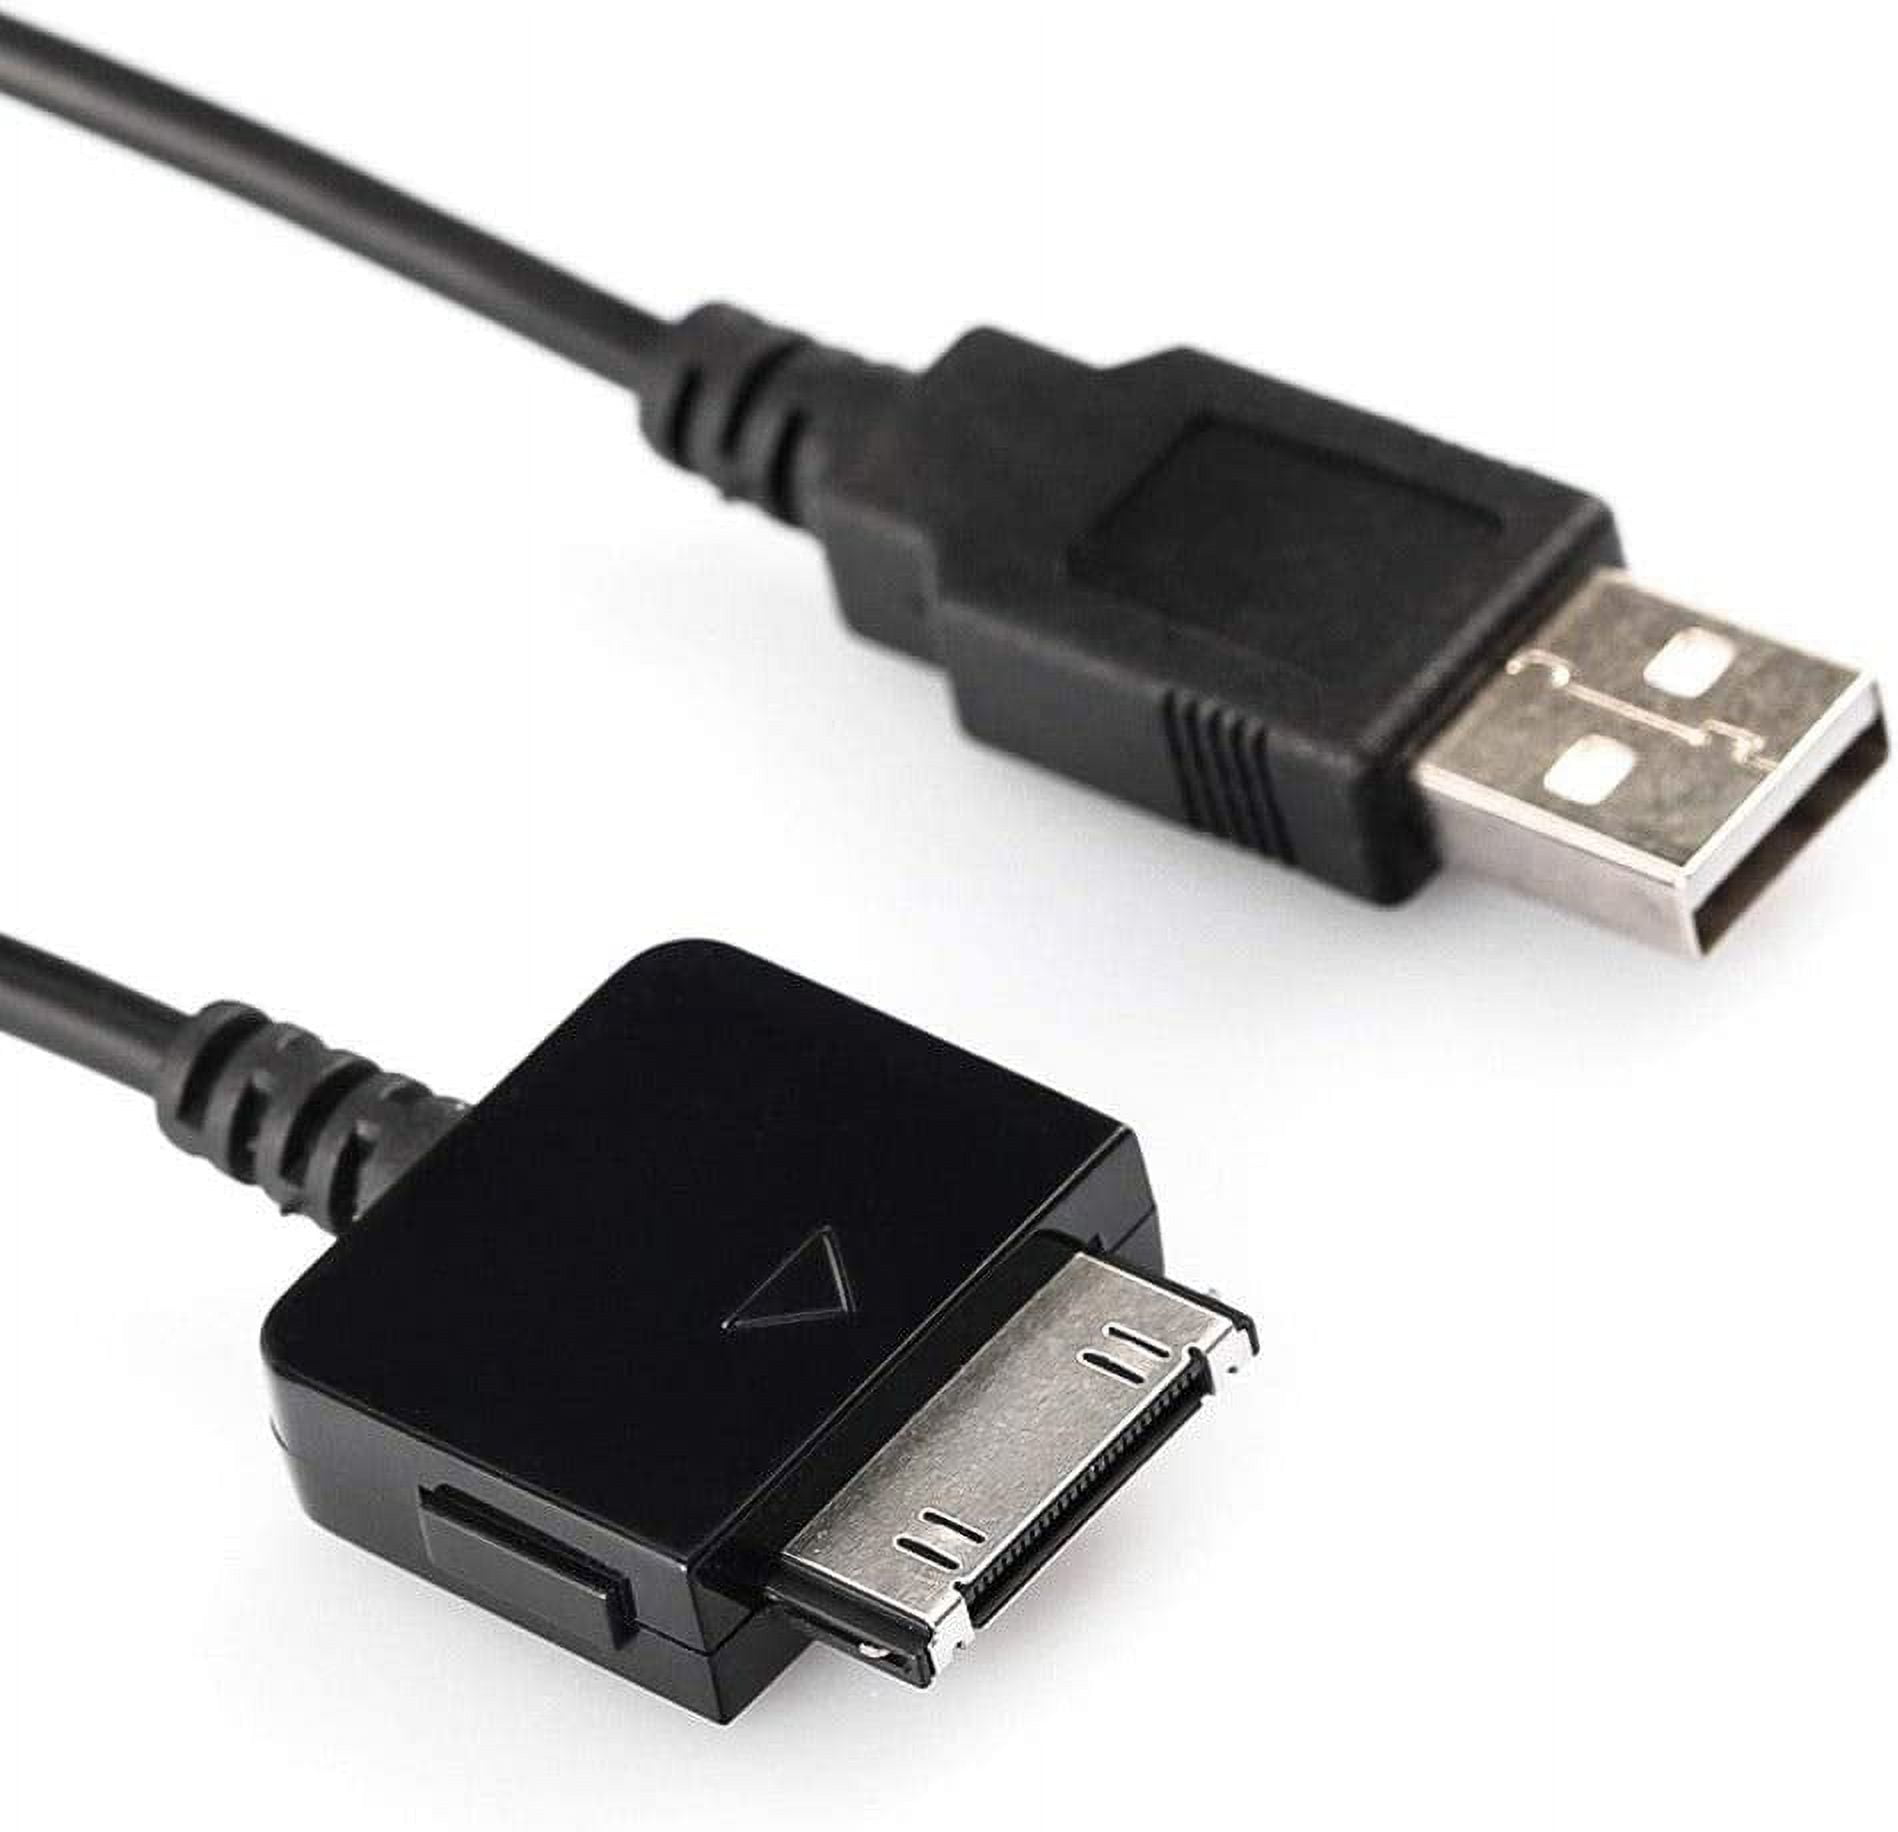 ZUNE Charger Cable USB Sync Data Transfer Power Charging Cord for Microsoft  ZUNE 80 ZUNE 120 ZUNE 4 ZUNE 8 ZUNE 16 